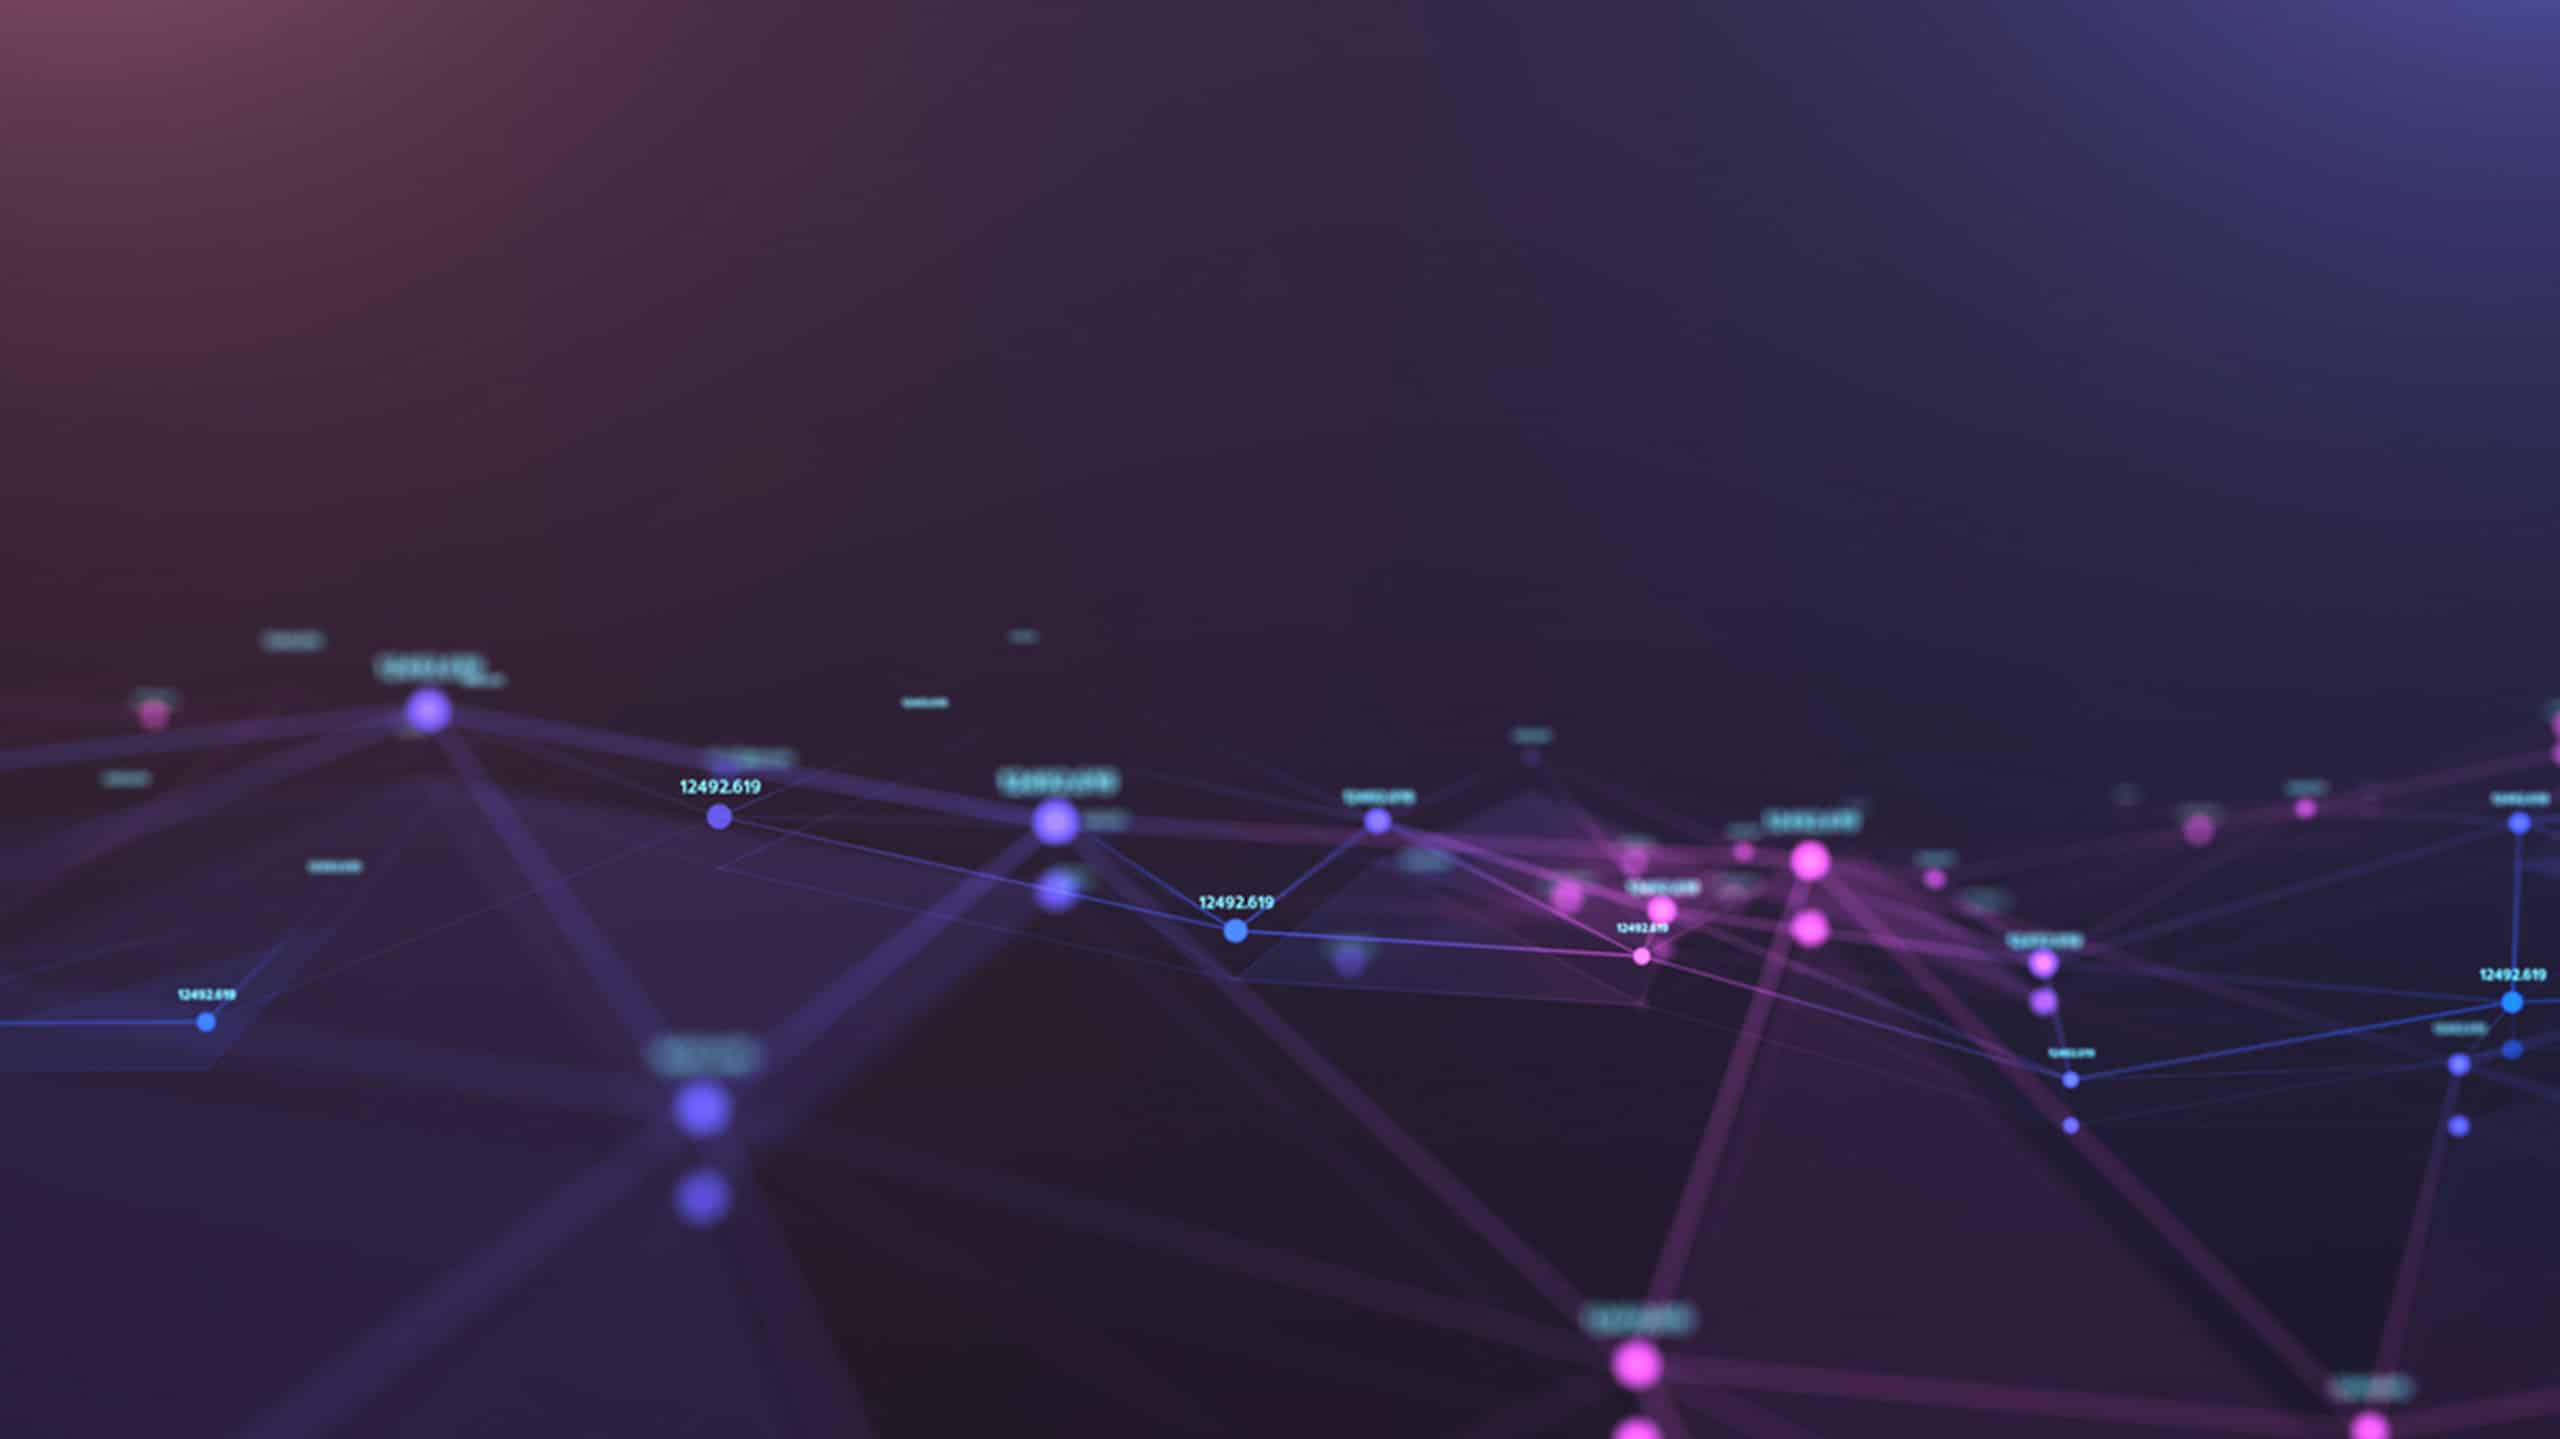 Abstract digital network background featuring interconnected nodes labeled with Debian 11 technical terms, highlighted in pink and blue colors on a dark gradient background.